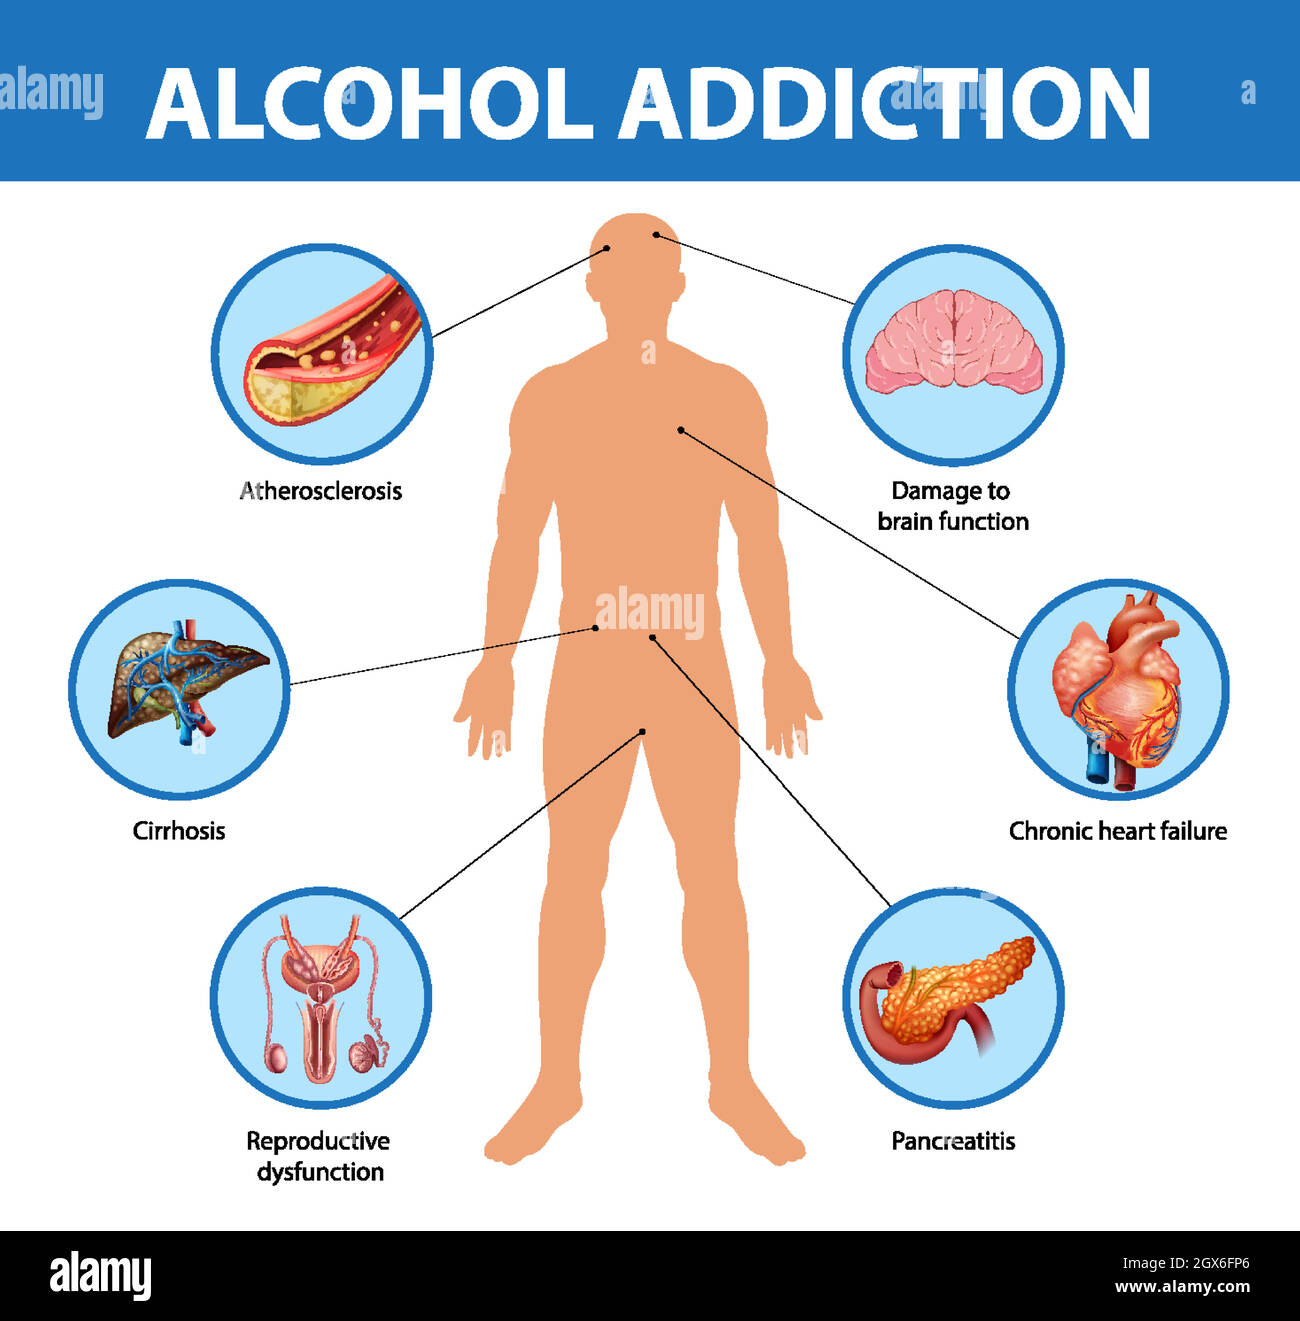 Alcohol addiction or alcoholism information infographic Stock Vector